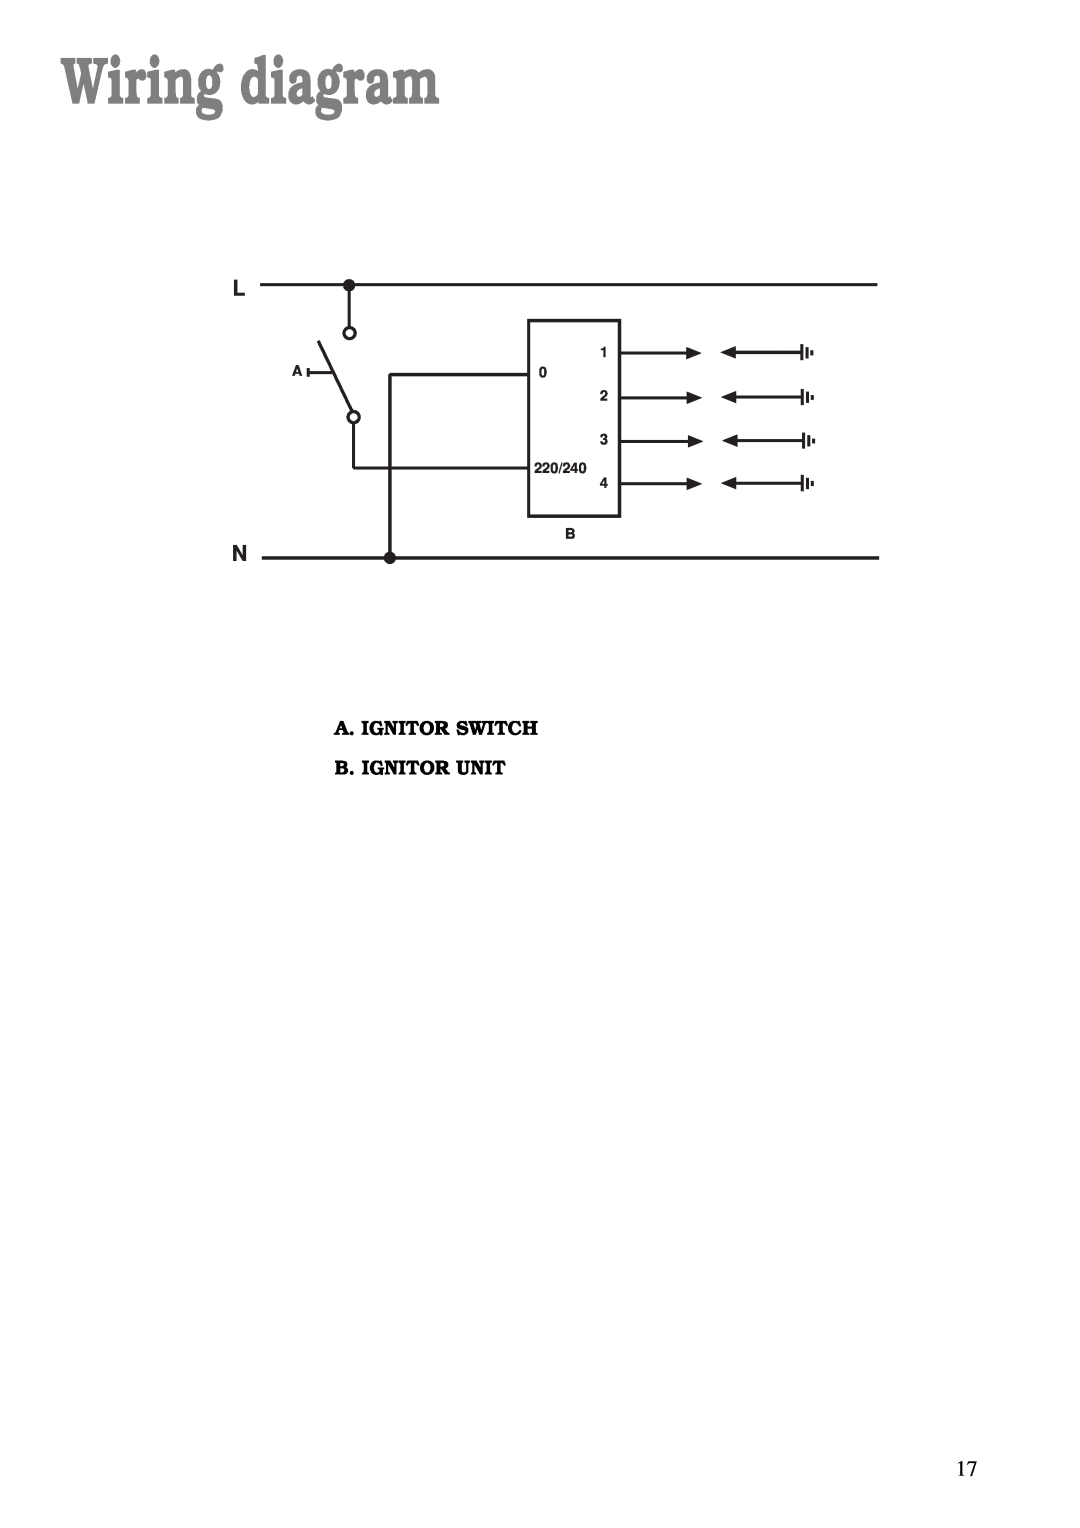 Tricity Bendix TBG 640 manual Wiring diagram, A. Ignitor Switch B. Ignitor Unit, 220/240 